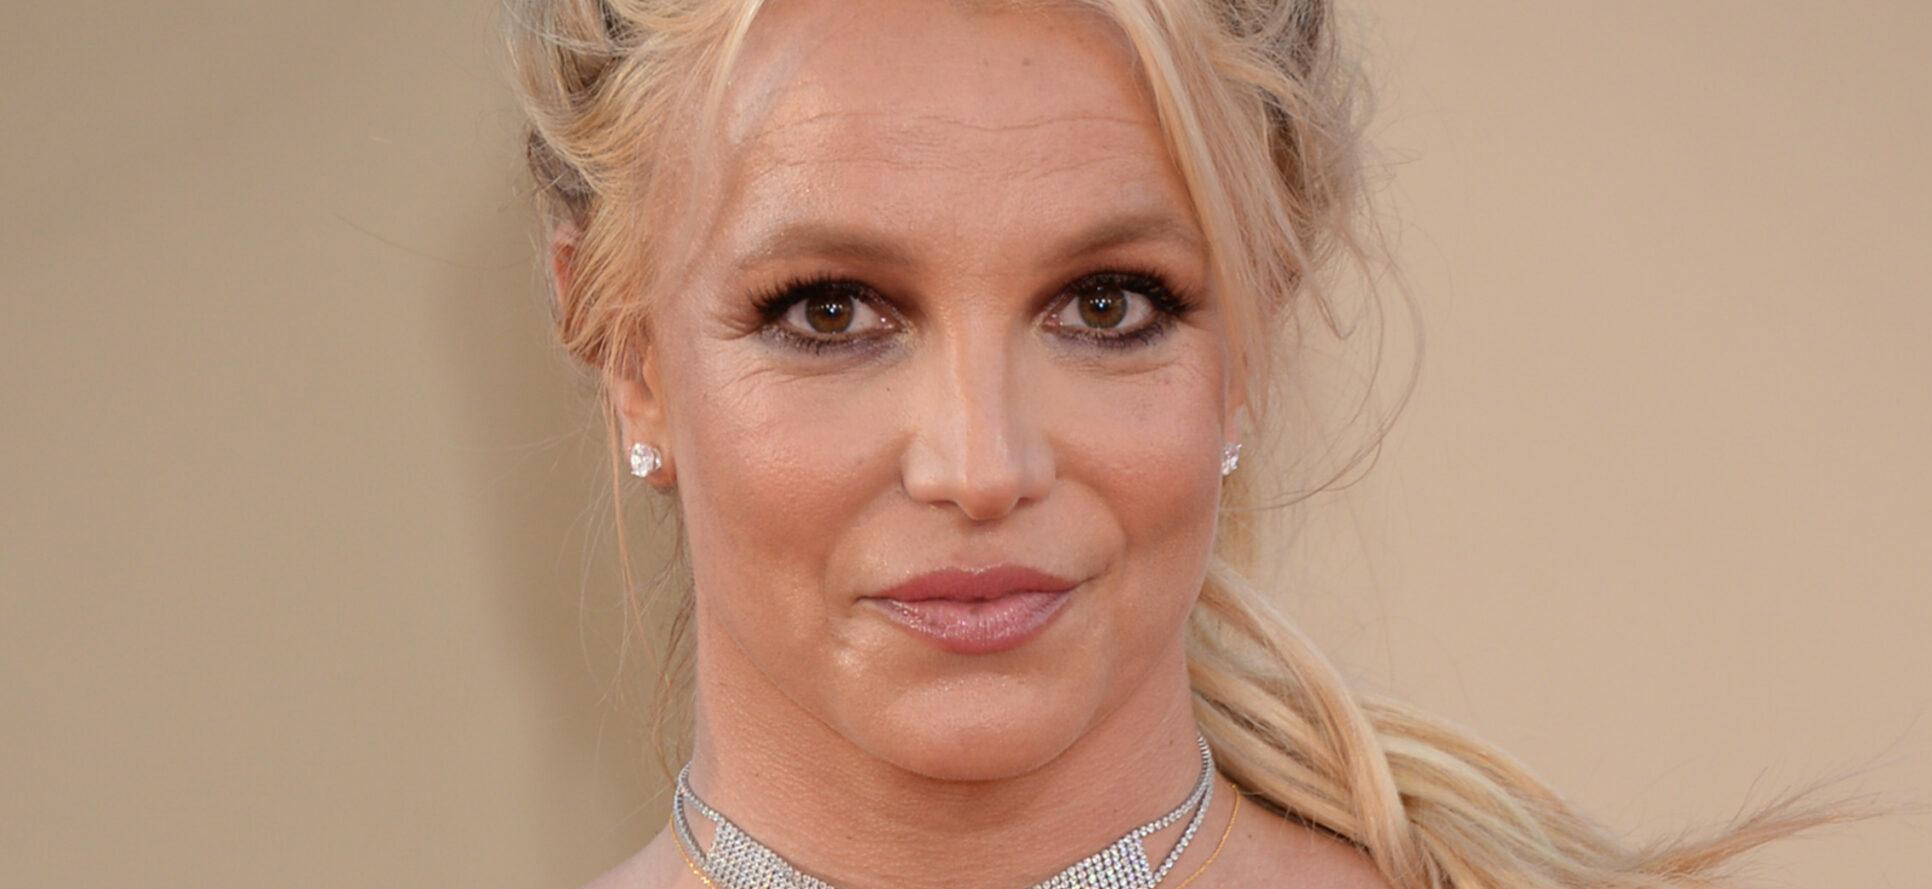 Britney Spears Breaks Silence On Her Experience With Botox: ‘Never Again’